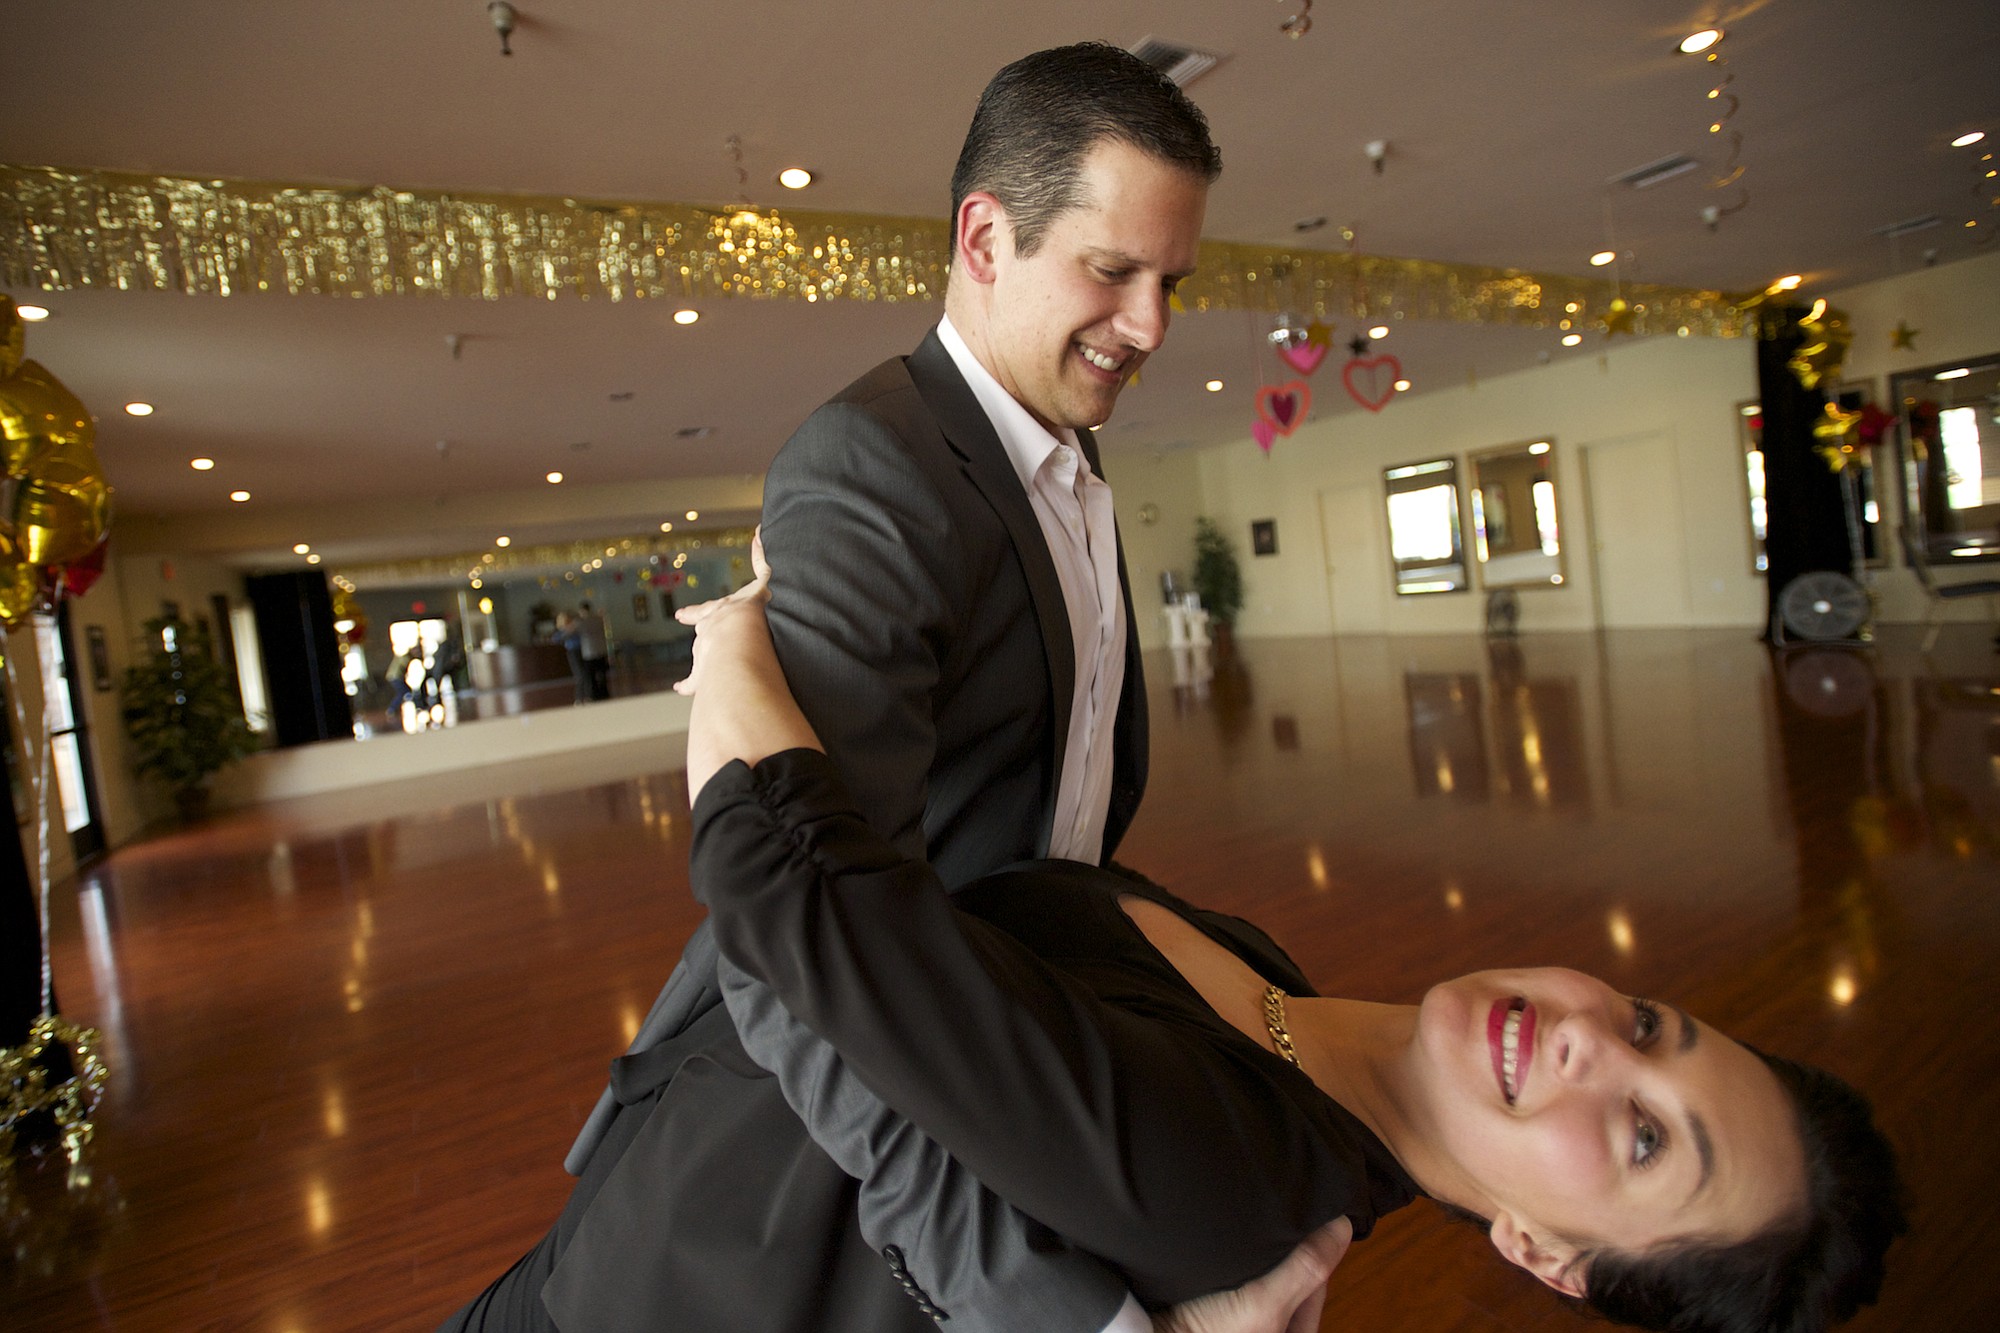 Arthur Murray dance instructor Phil Auer demonstrates his moves with fellow instructor Christina Mullen  in Vancouver.